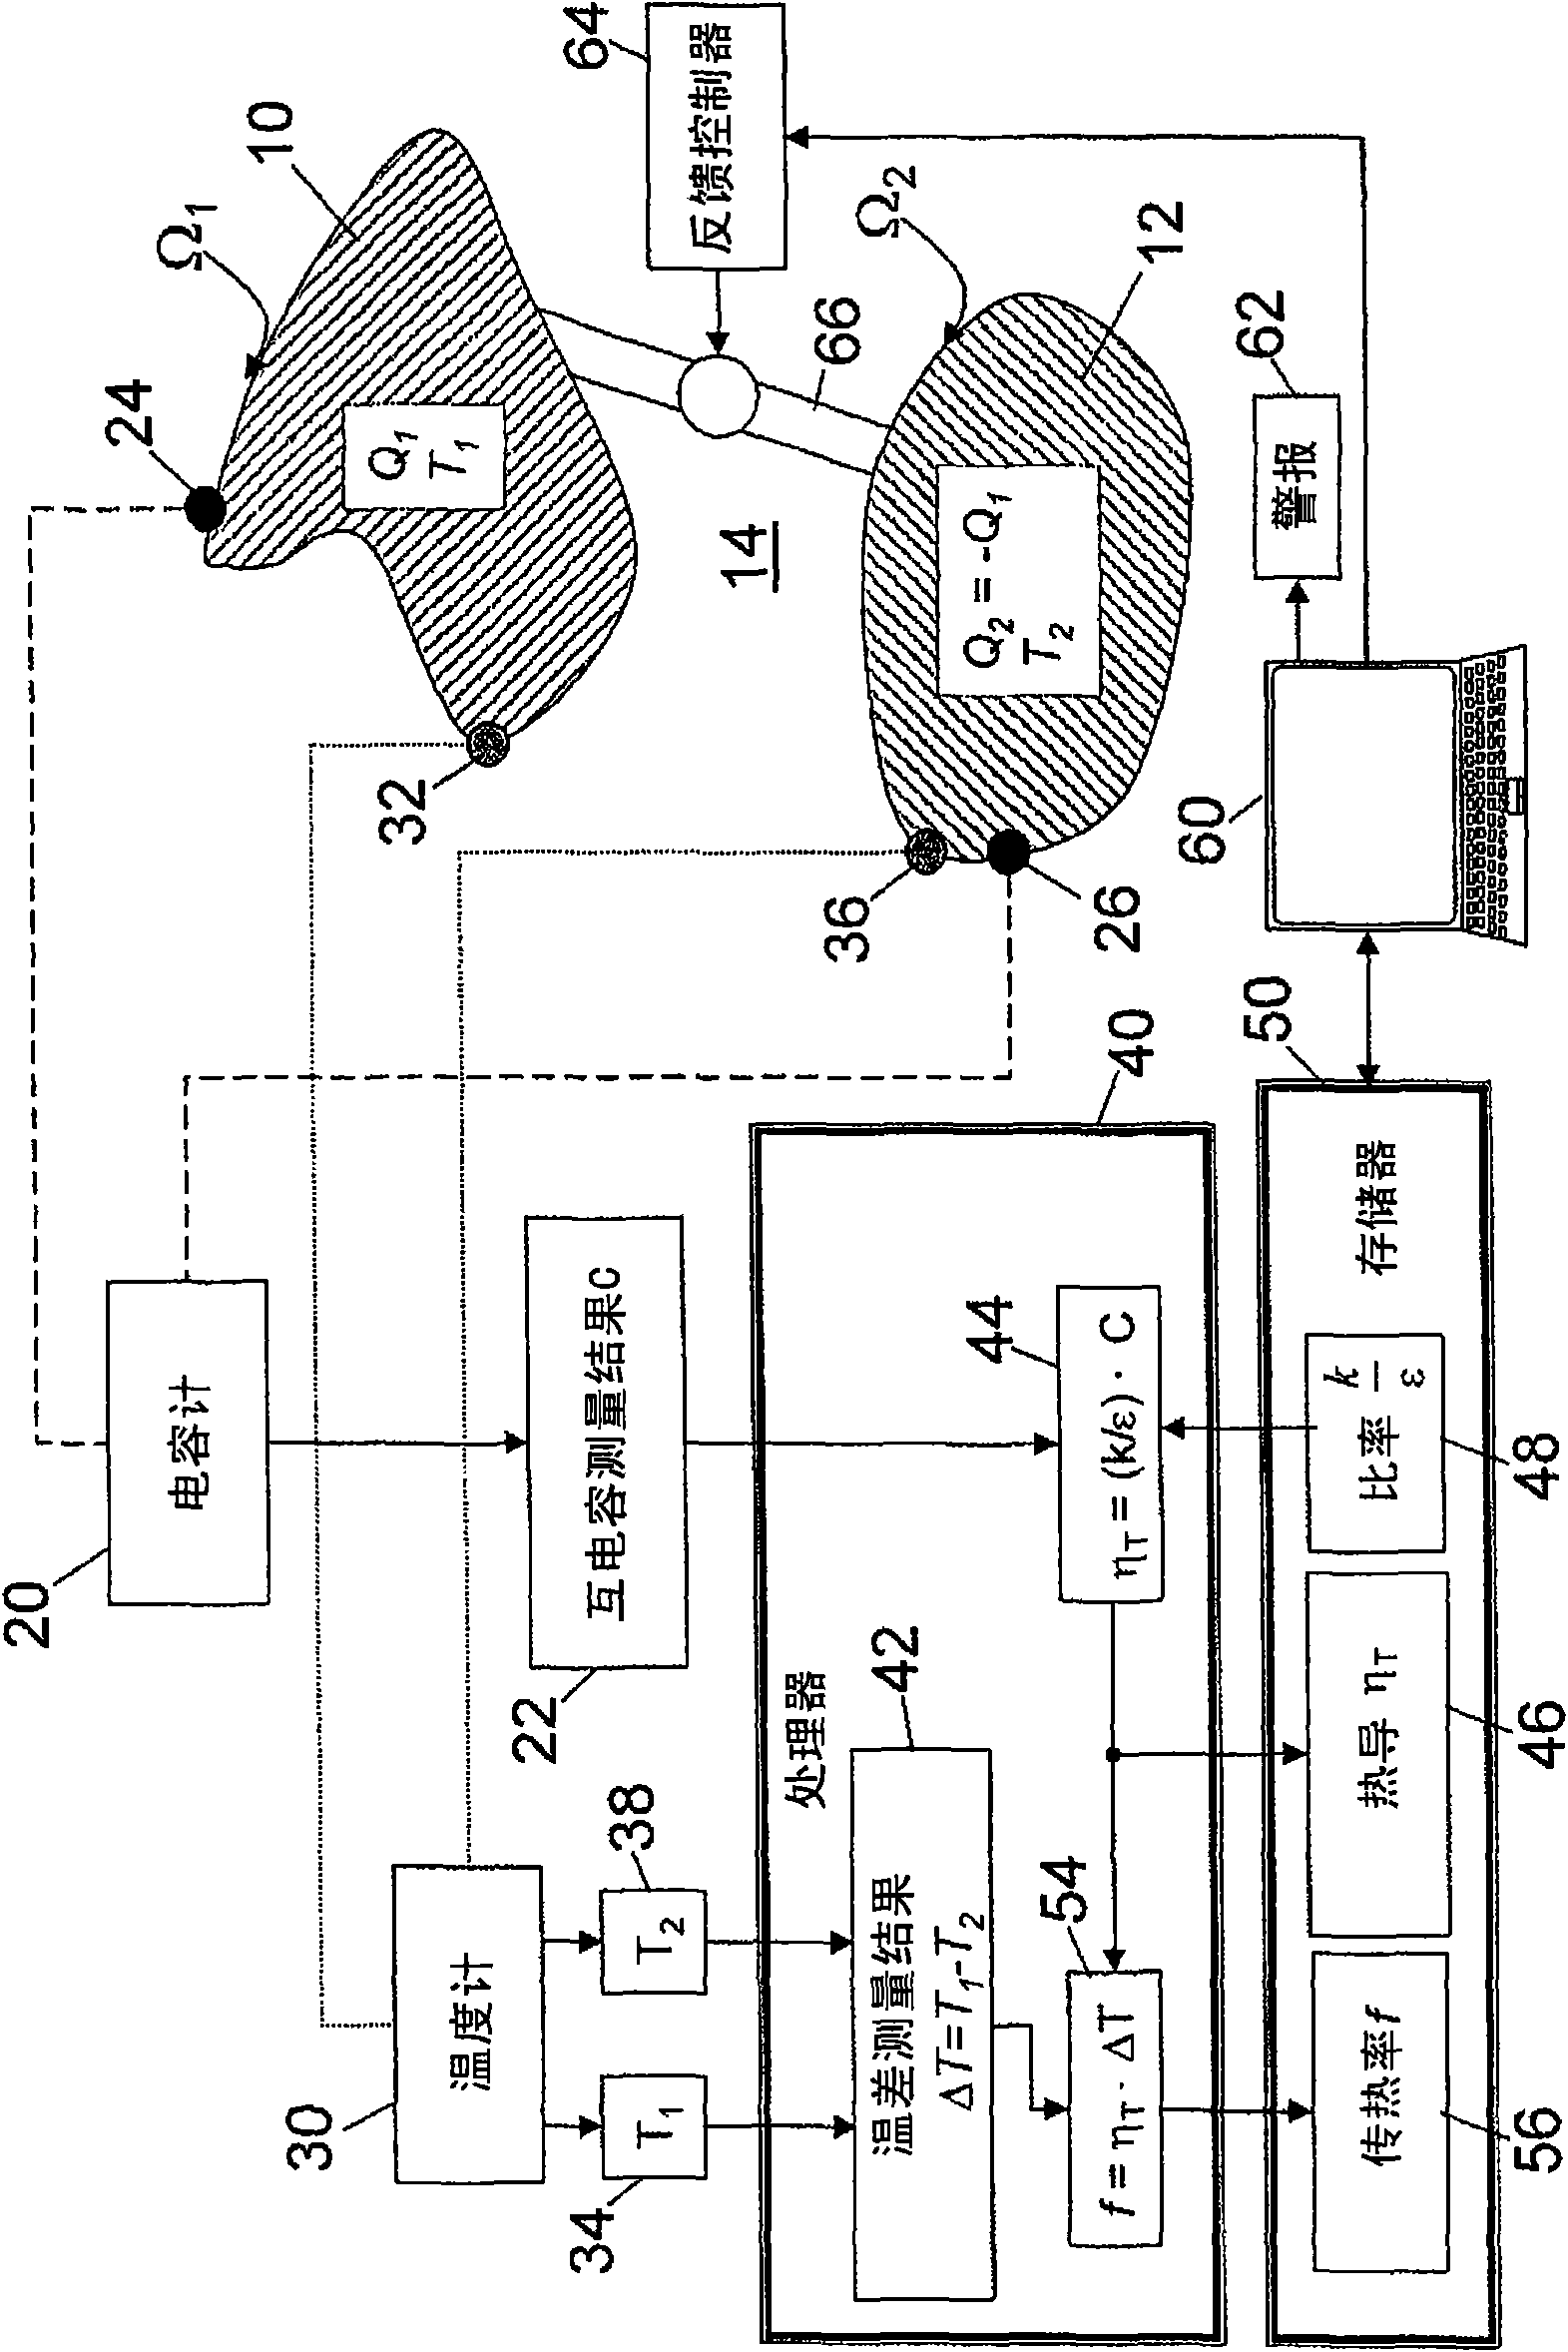 Apparatuses and methods for measuring and controlling thermal insulation